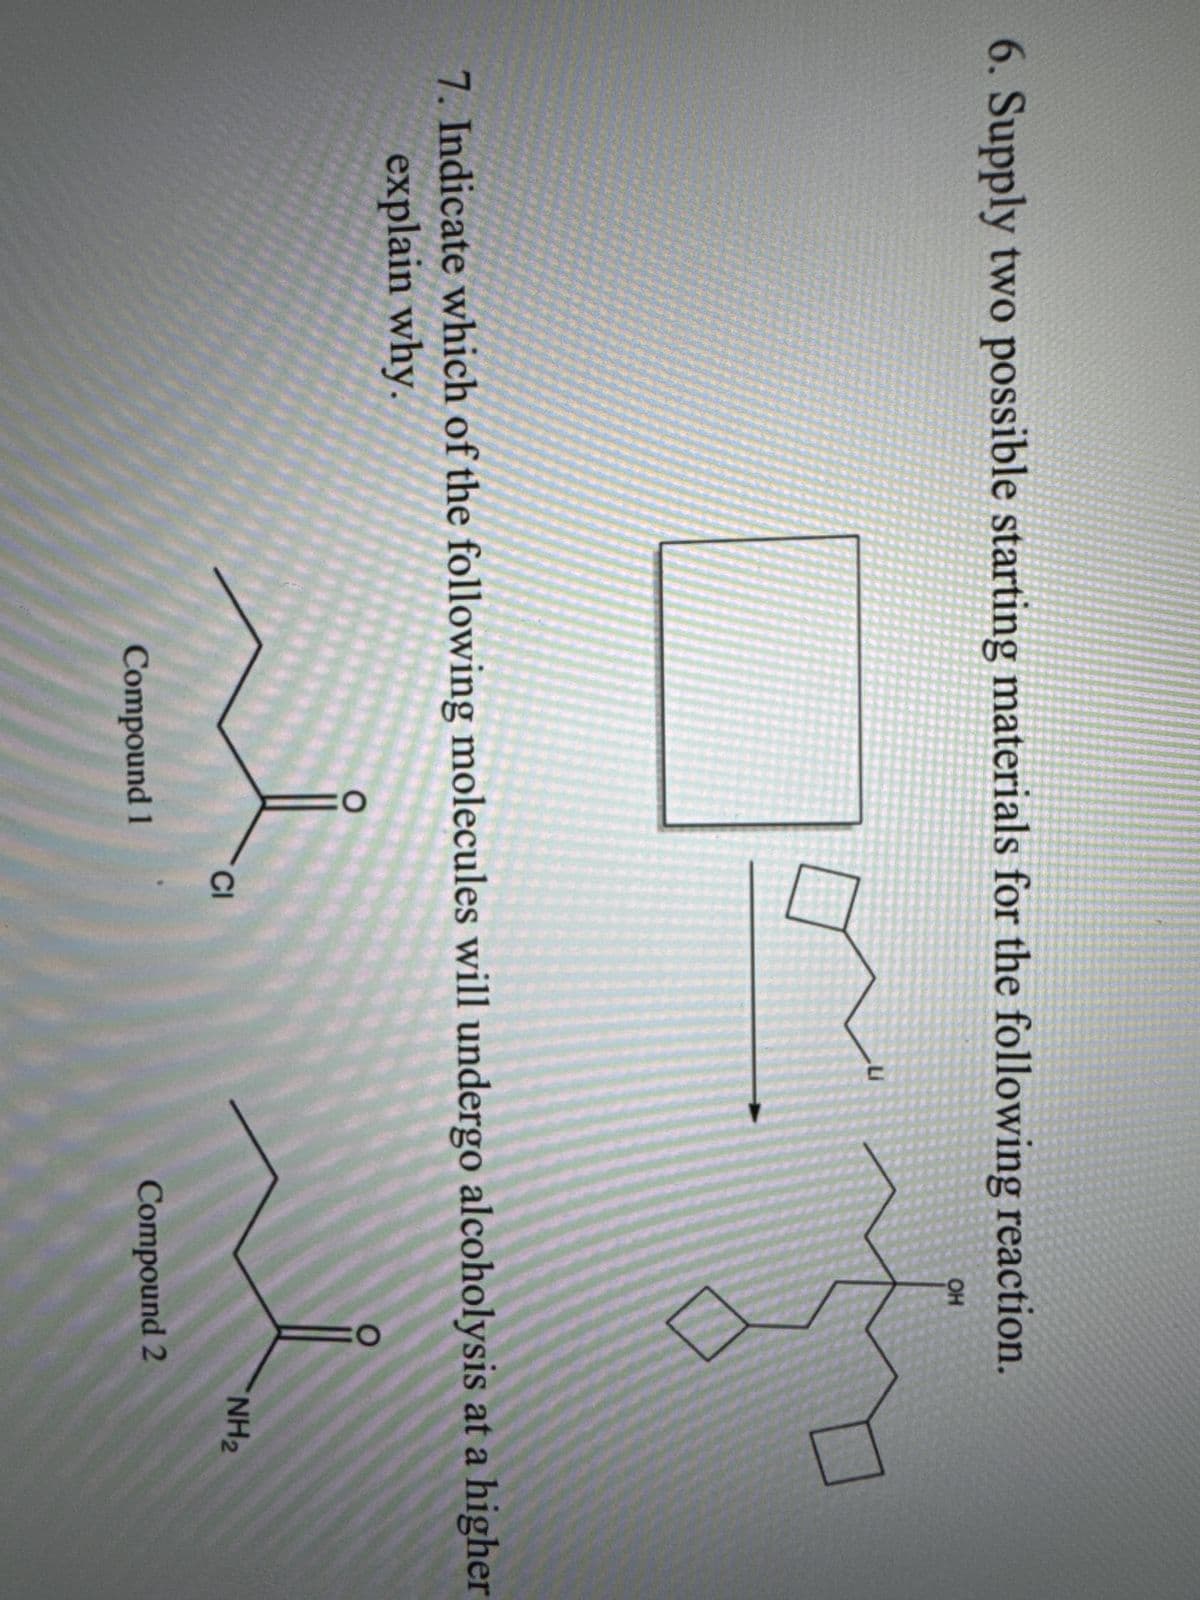 6. Supply two possible starting materials for the following reaction.
OH
7. Indicate which of the following molecules will undergo alcoholysis at a higher
explain why.
CI
NH2
Compound 1
Compound 2